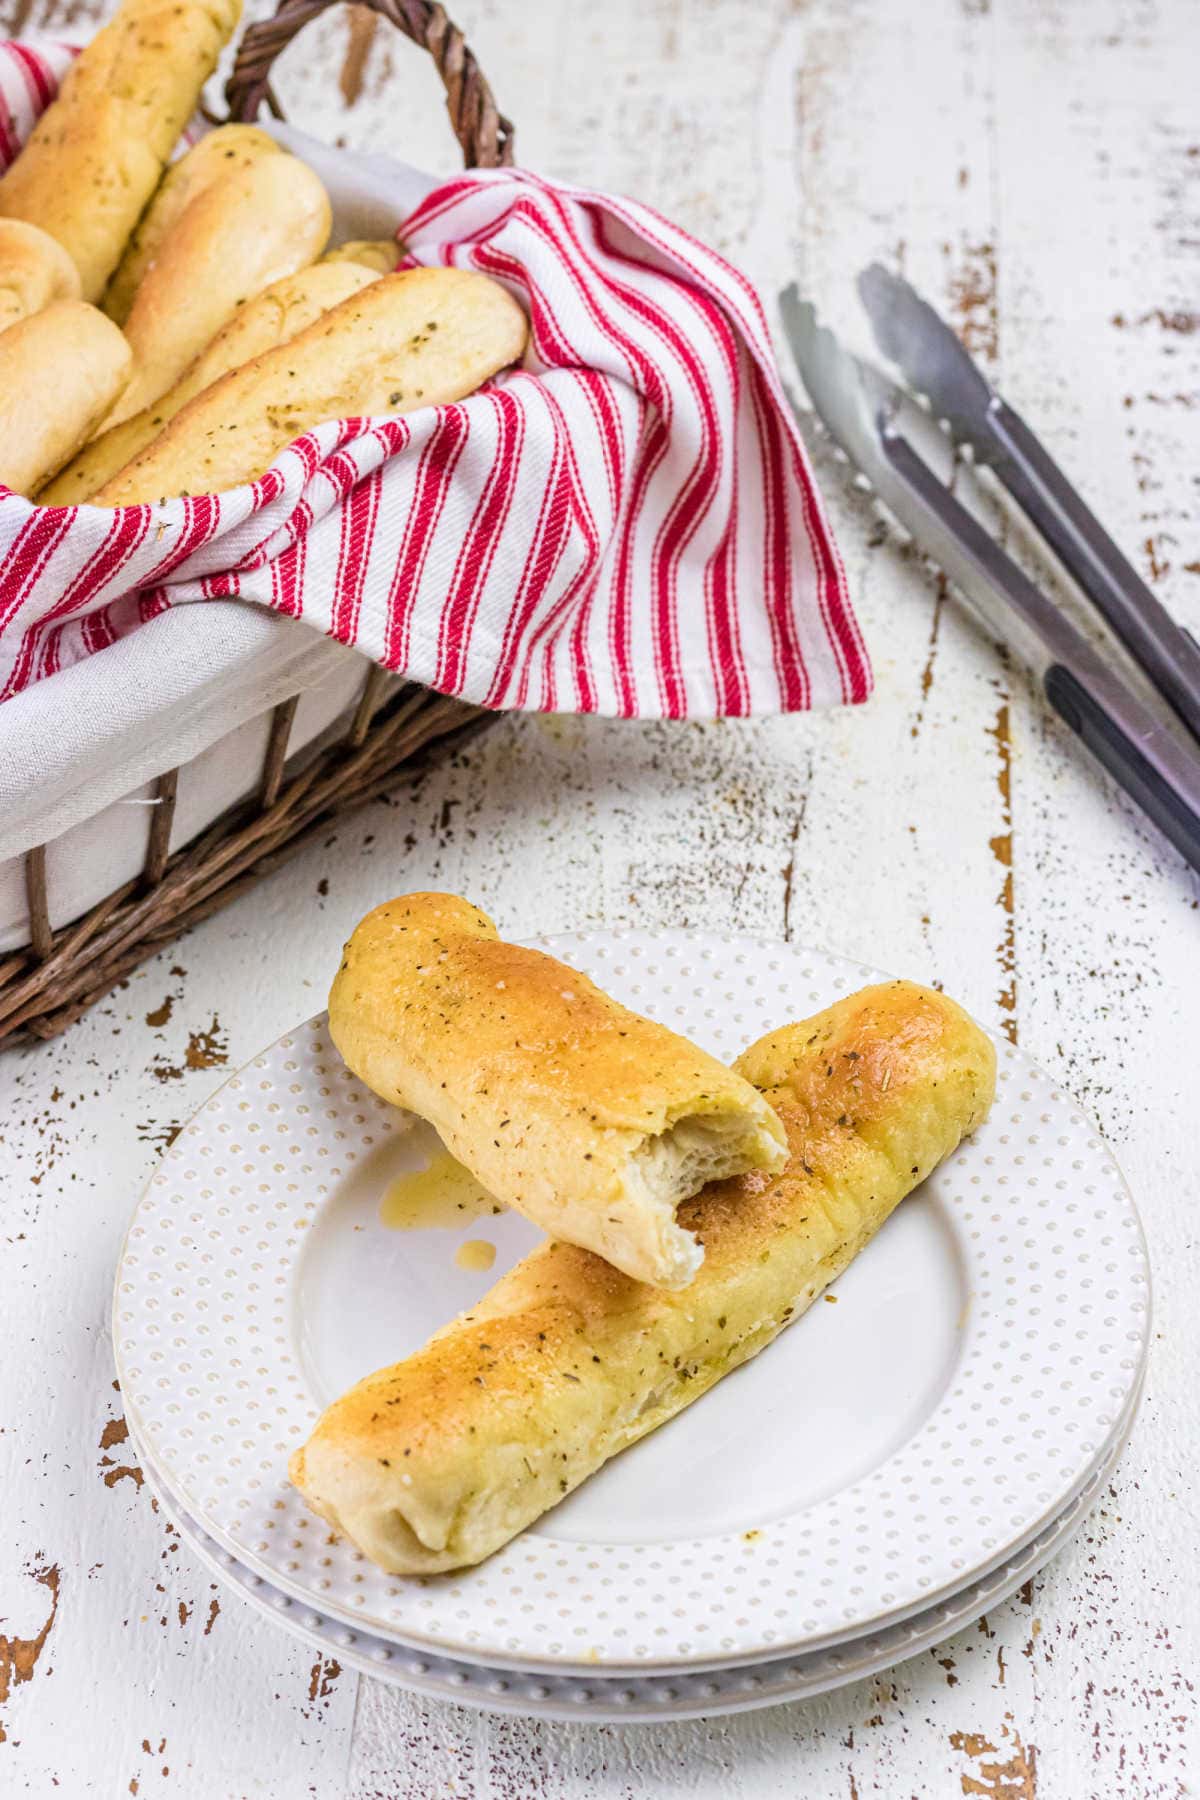 Decorative image of breadsticks on a plate.